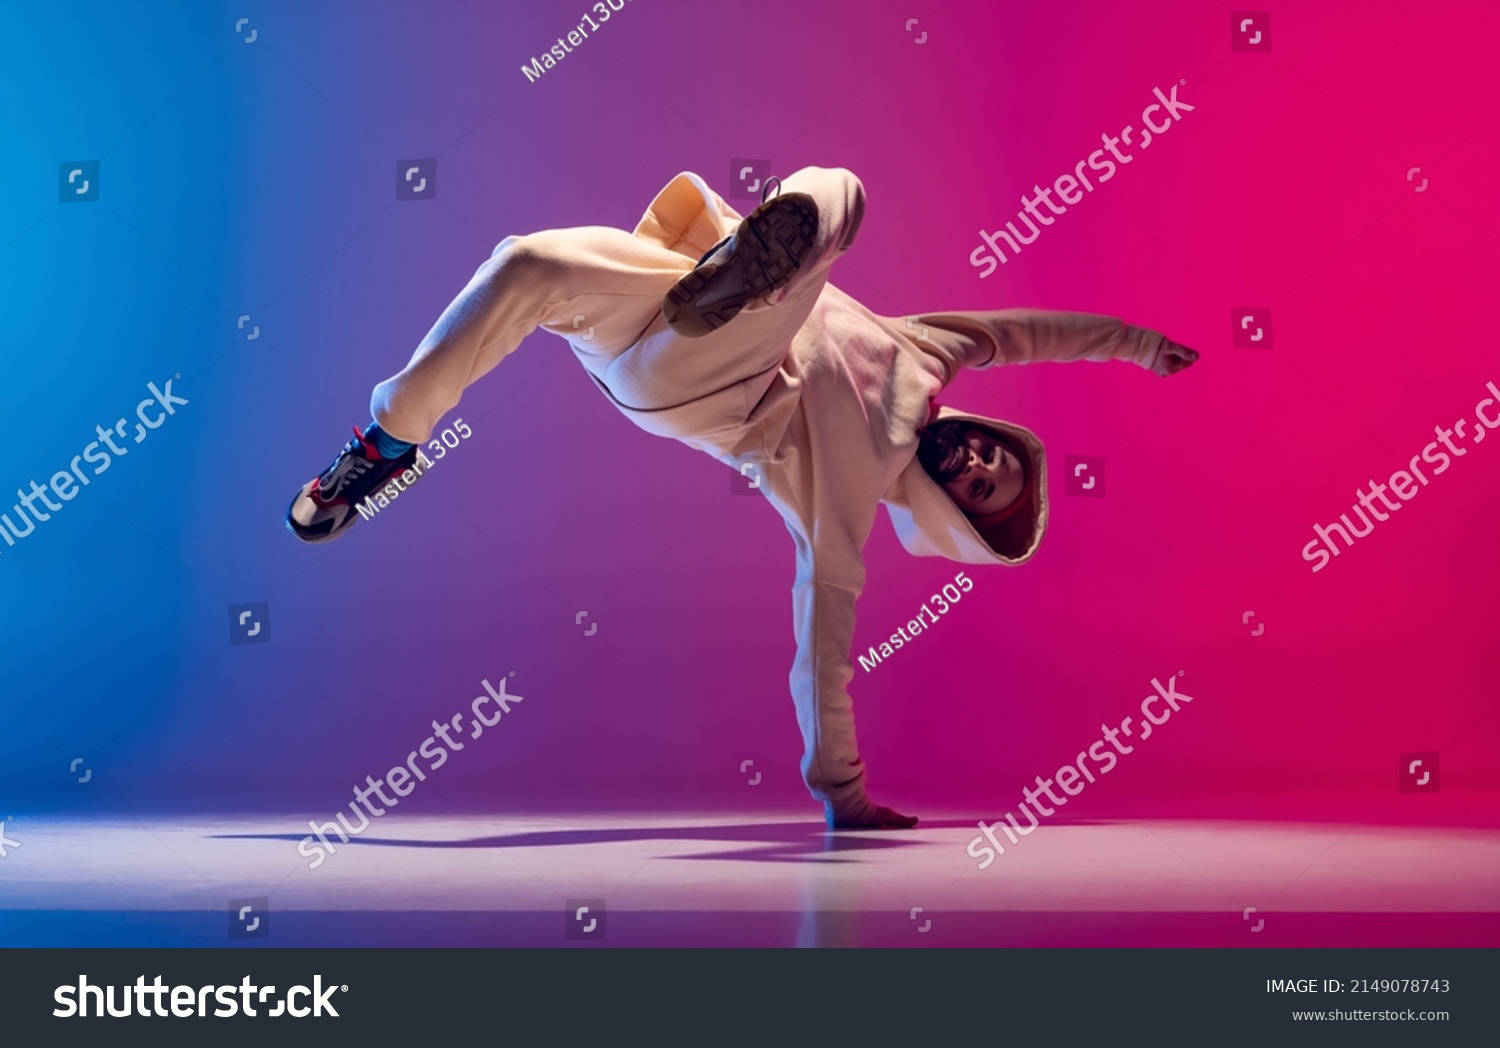 Hand stand. Studio shot of young flexible sportive man dancing breakdance in white outfit on gradient pink blue background. Concept of action, art, beauty, sport, youth. Dancer shows breakdance #2149078743